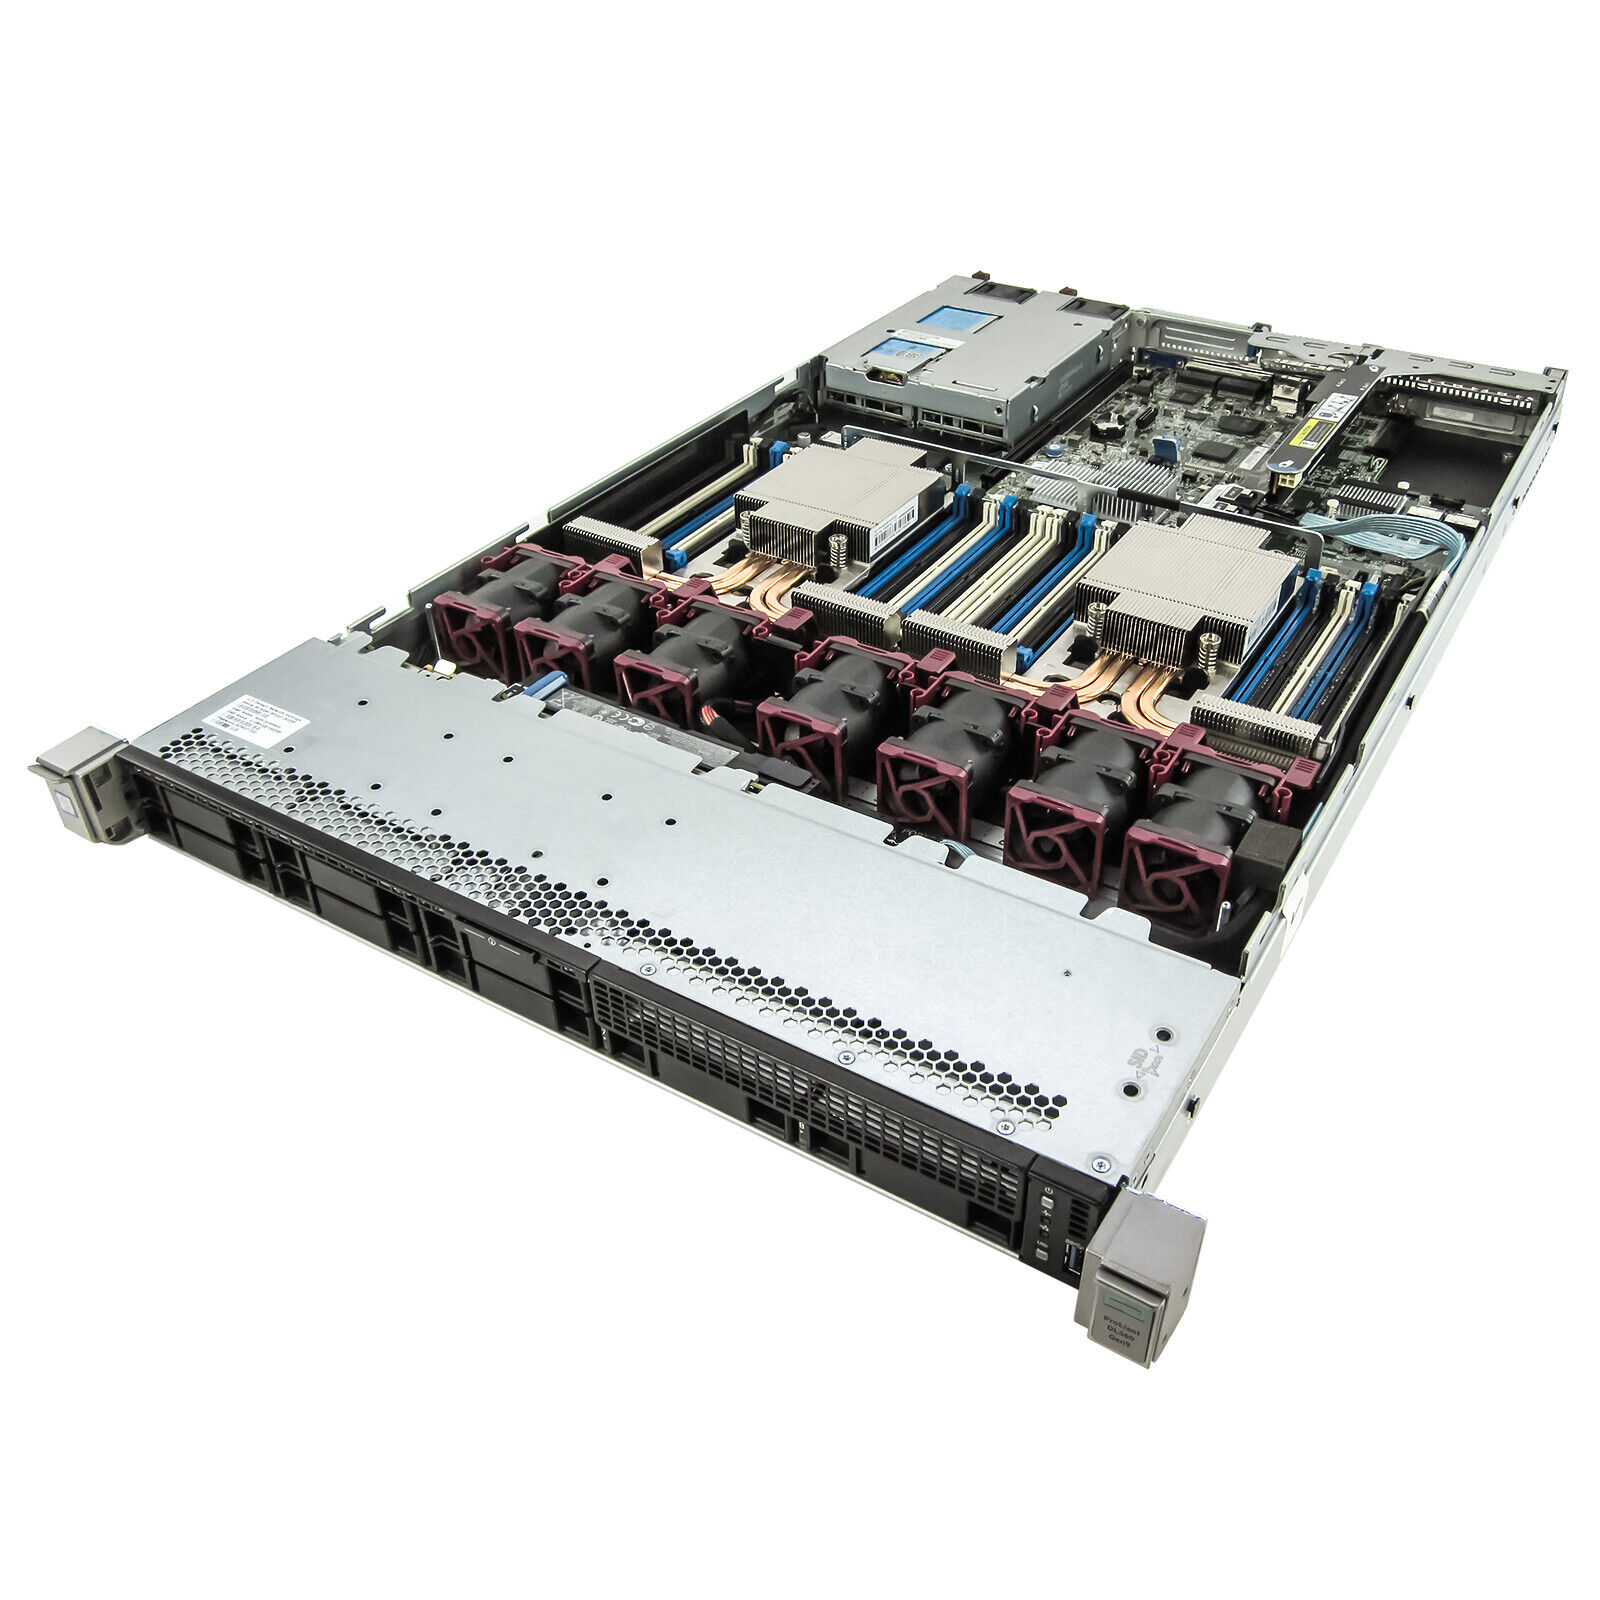 HP ProLiant DL360 G9 Server 2x 3.20Ghz E5-2667v3 8C 256GB 2x 300GB 15K High-End